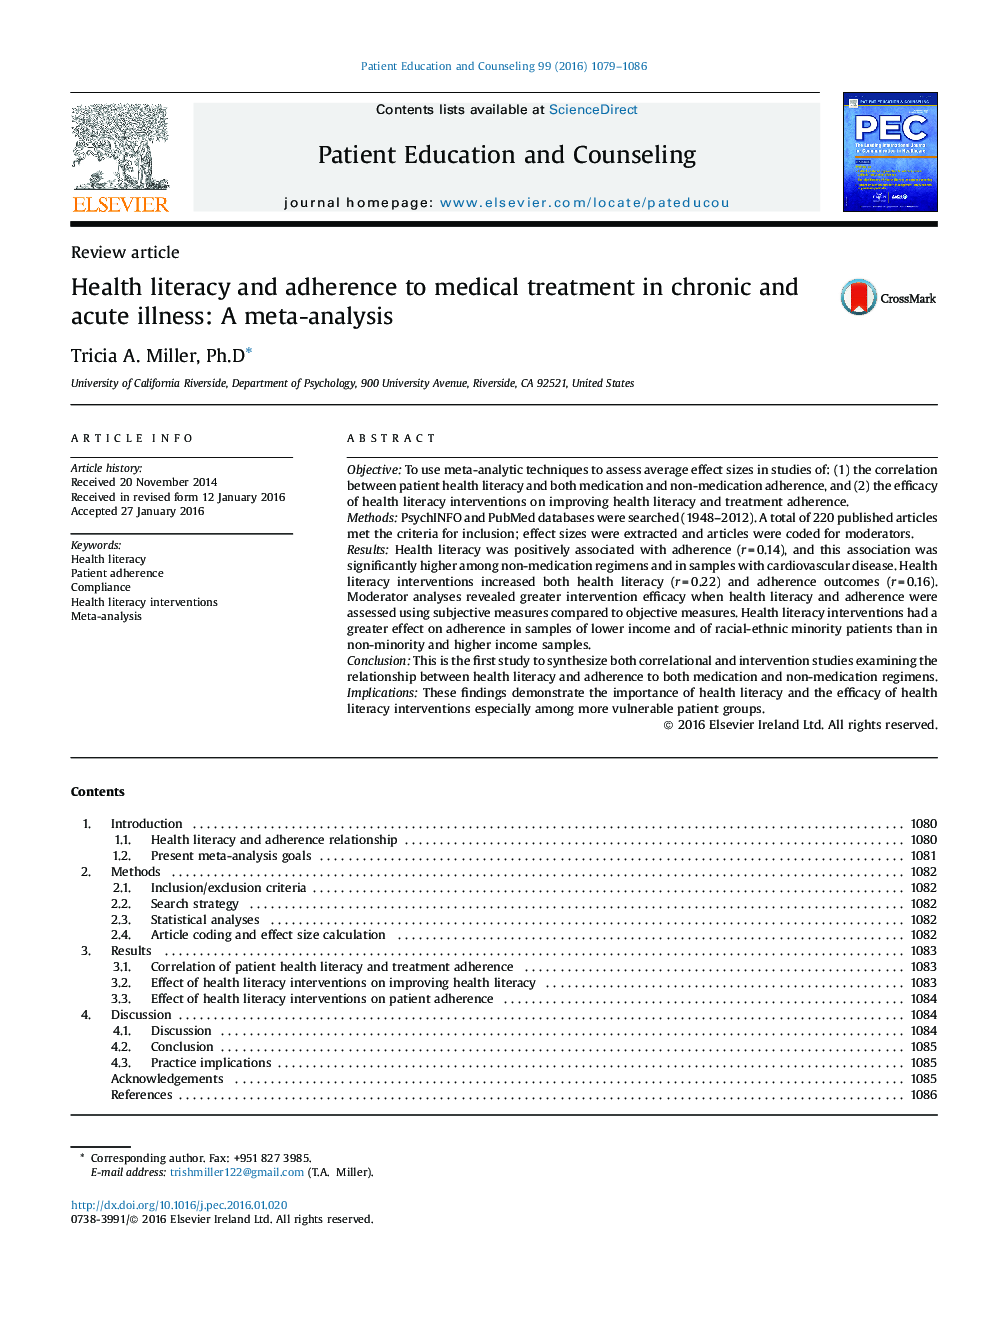 Health literacy and adherence to medical treatment in chronic and acute illness: A meta-analysis